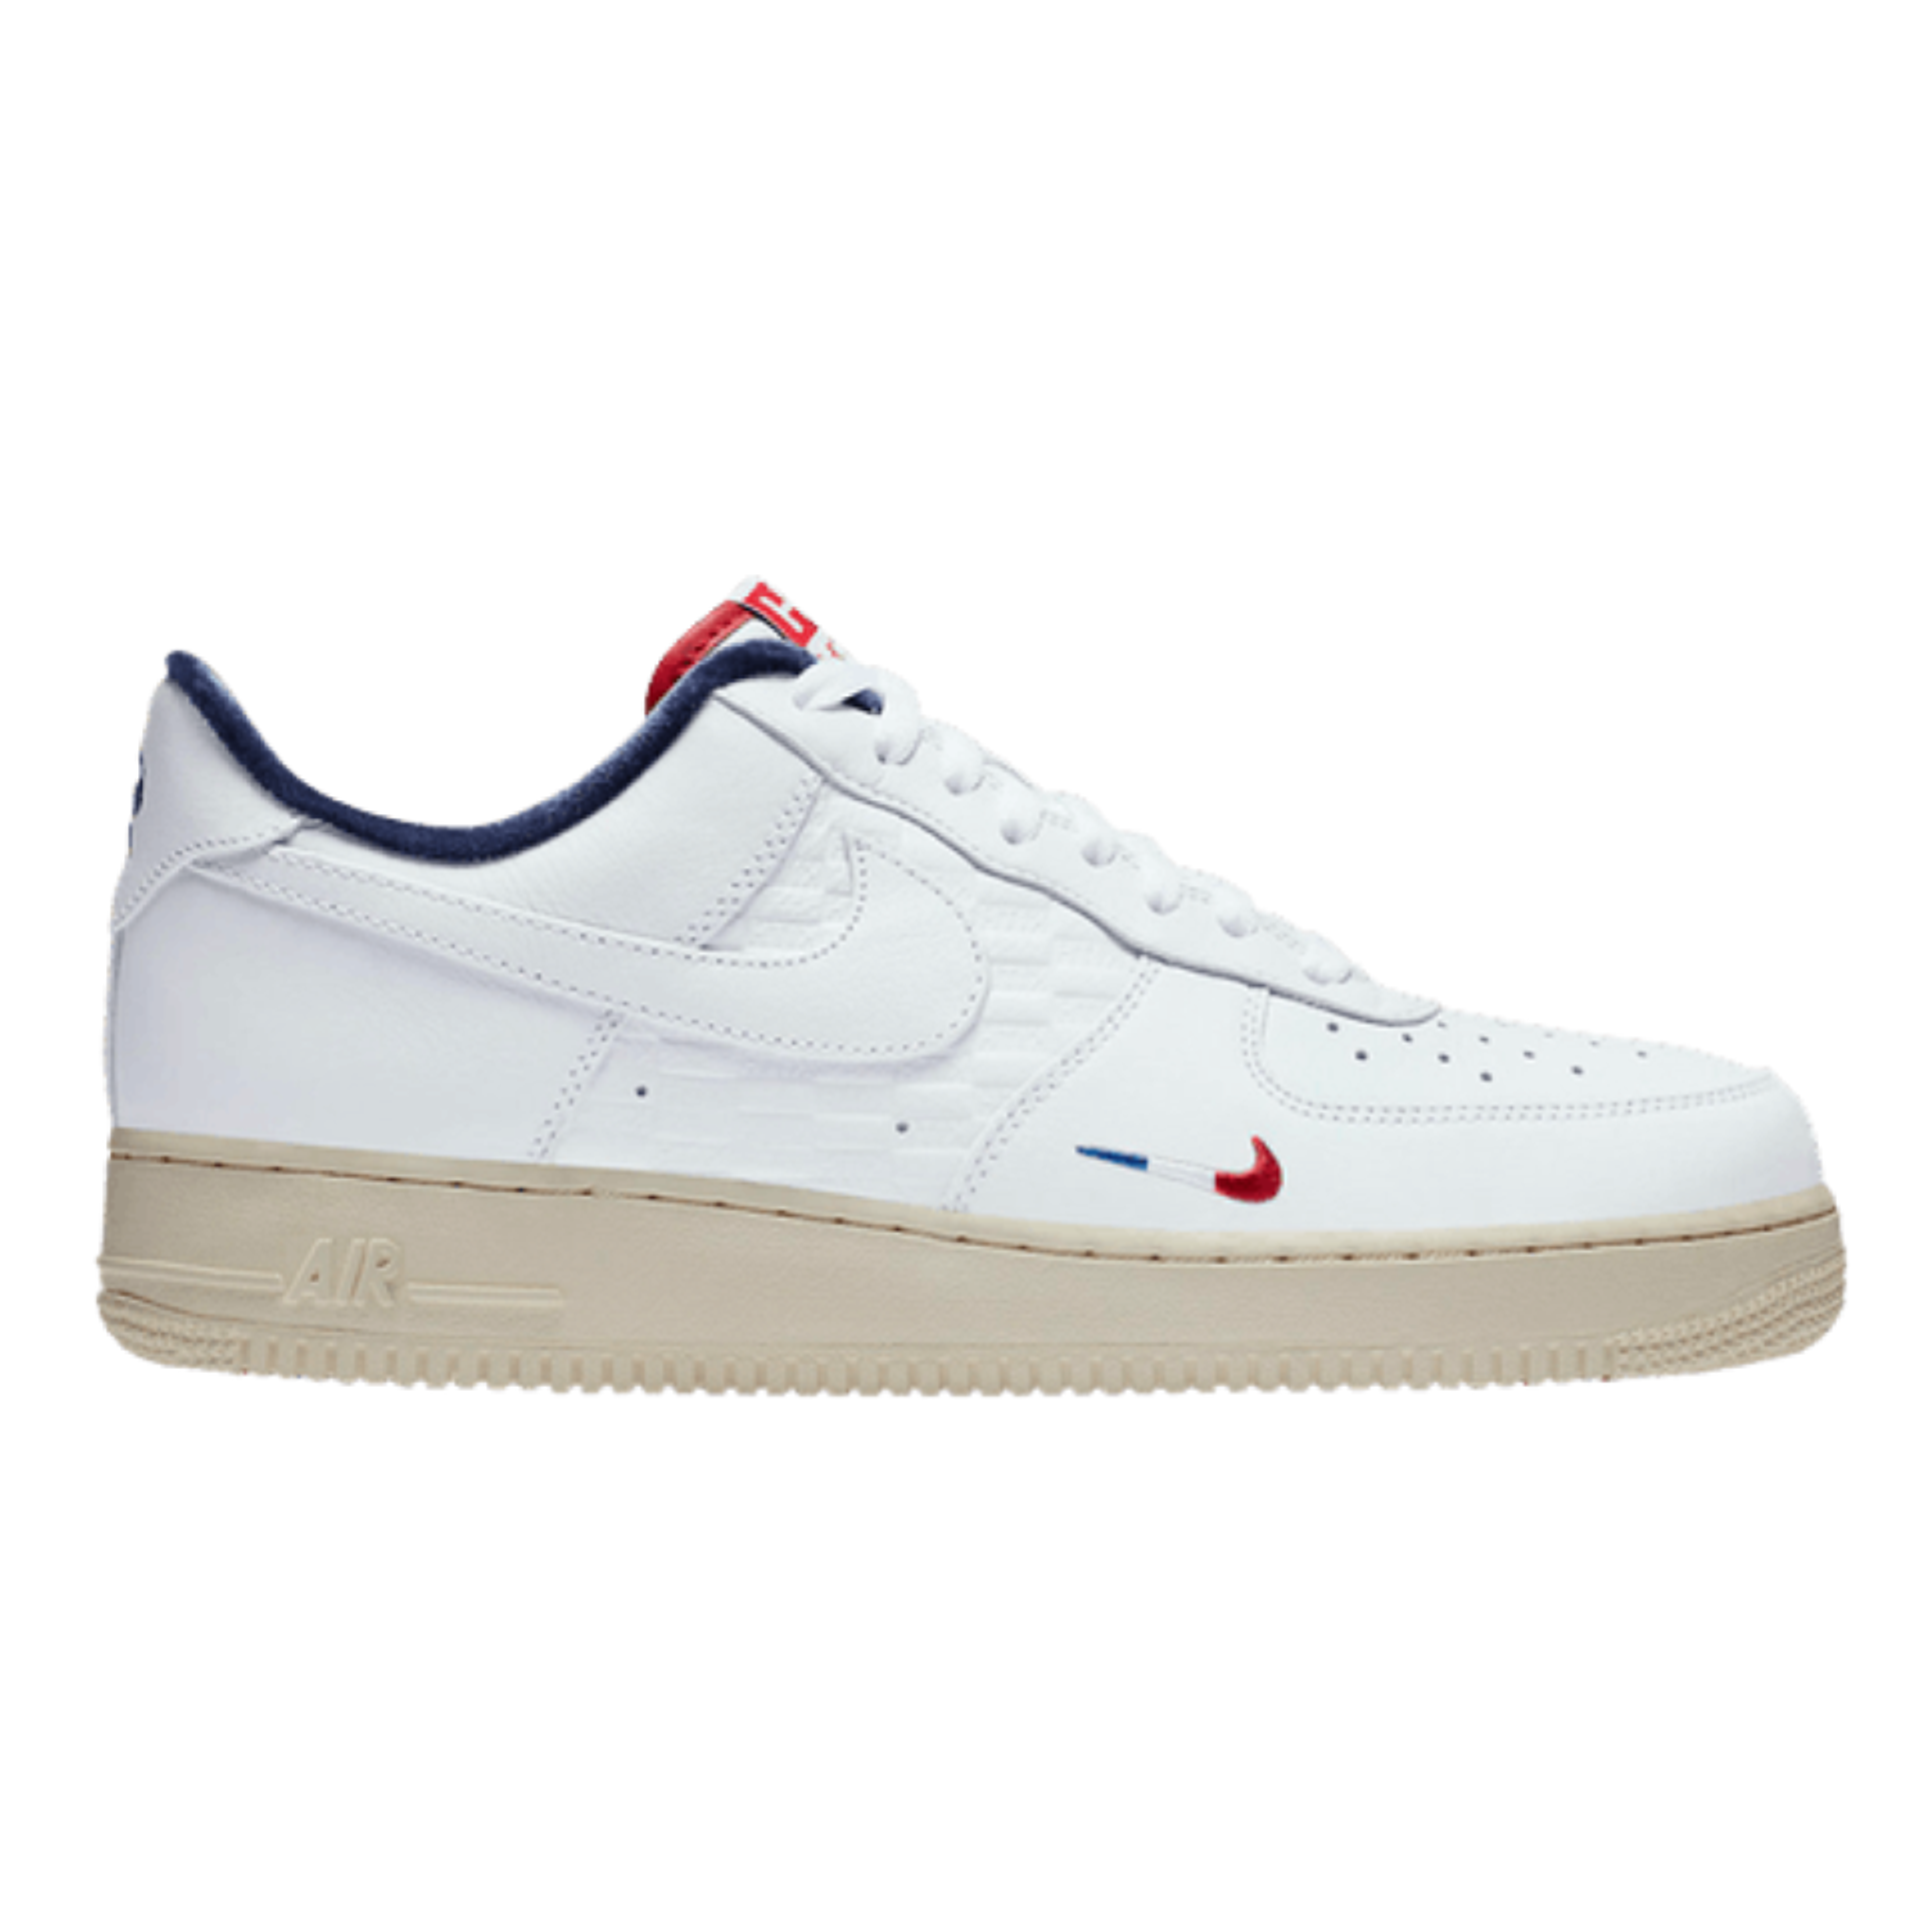 Nike KITH x Air Force 1 Low 'France'